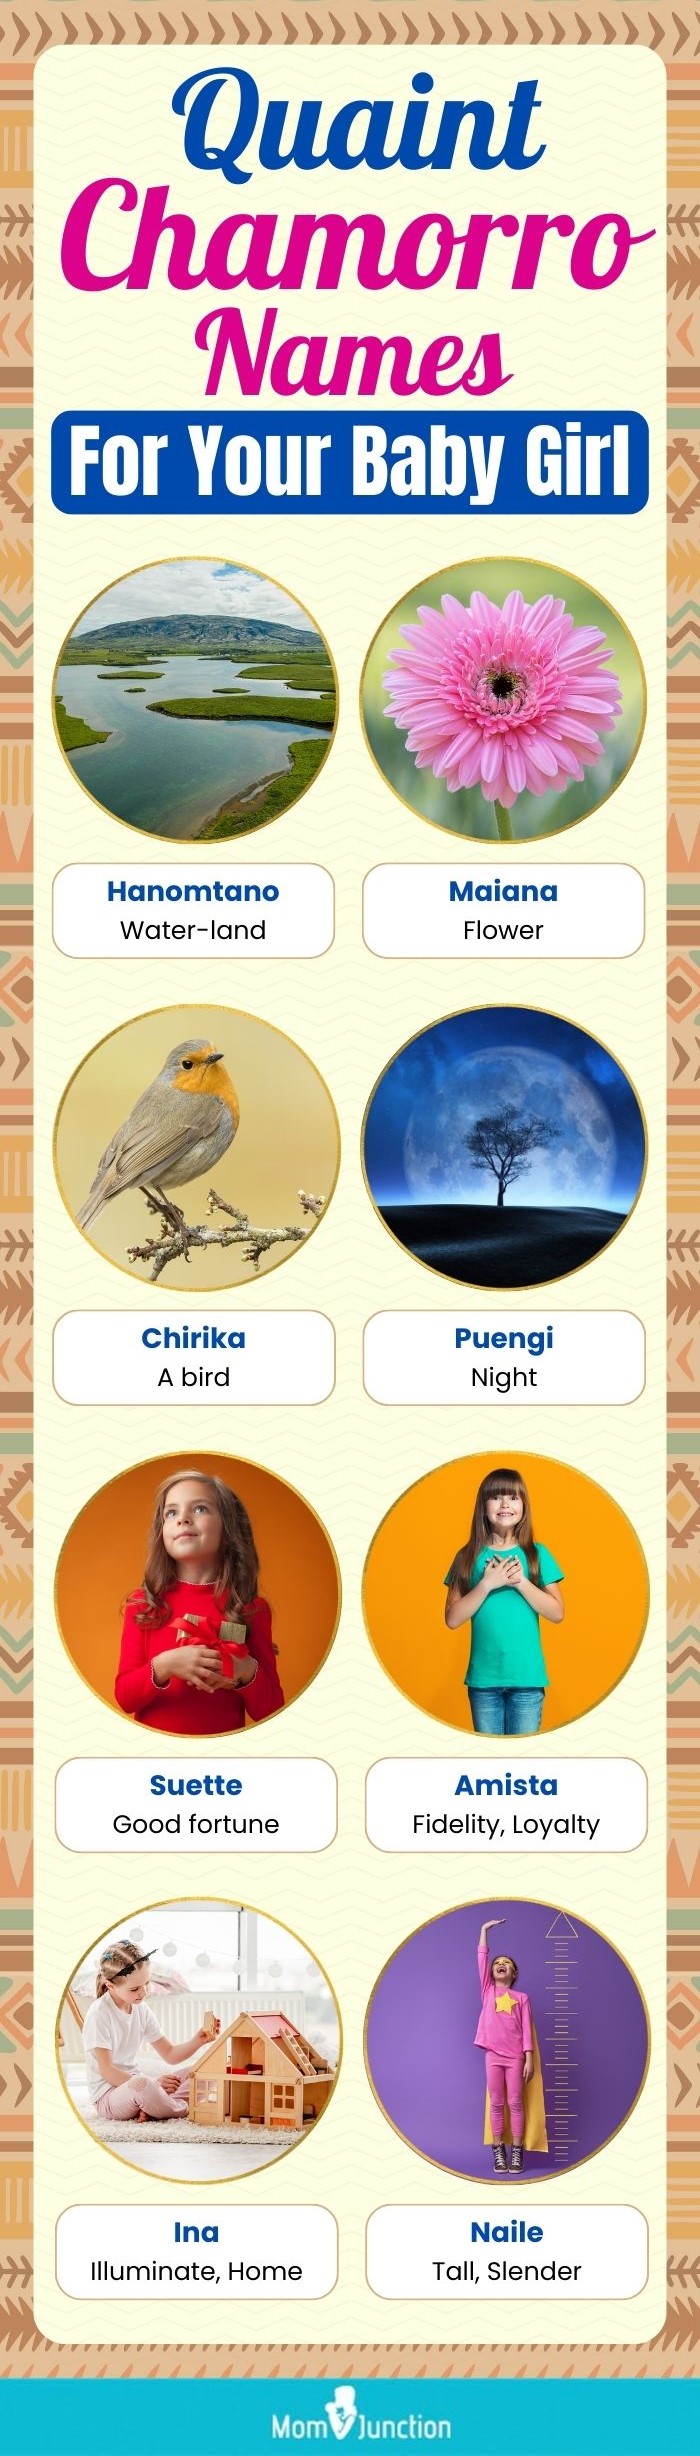 quaint chamorro names for your baby girl (infographic)